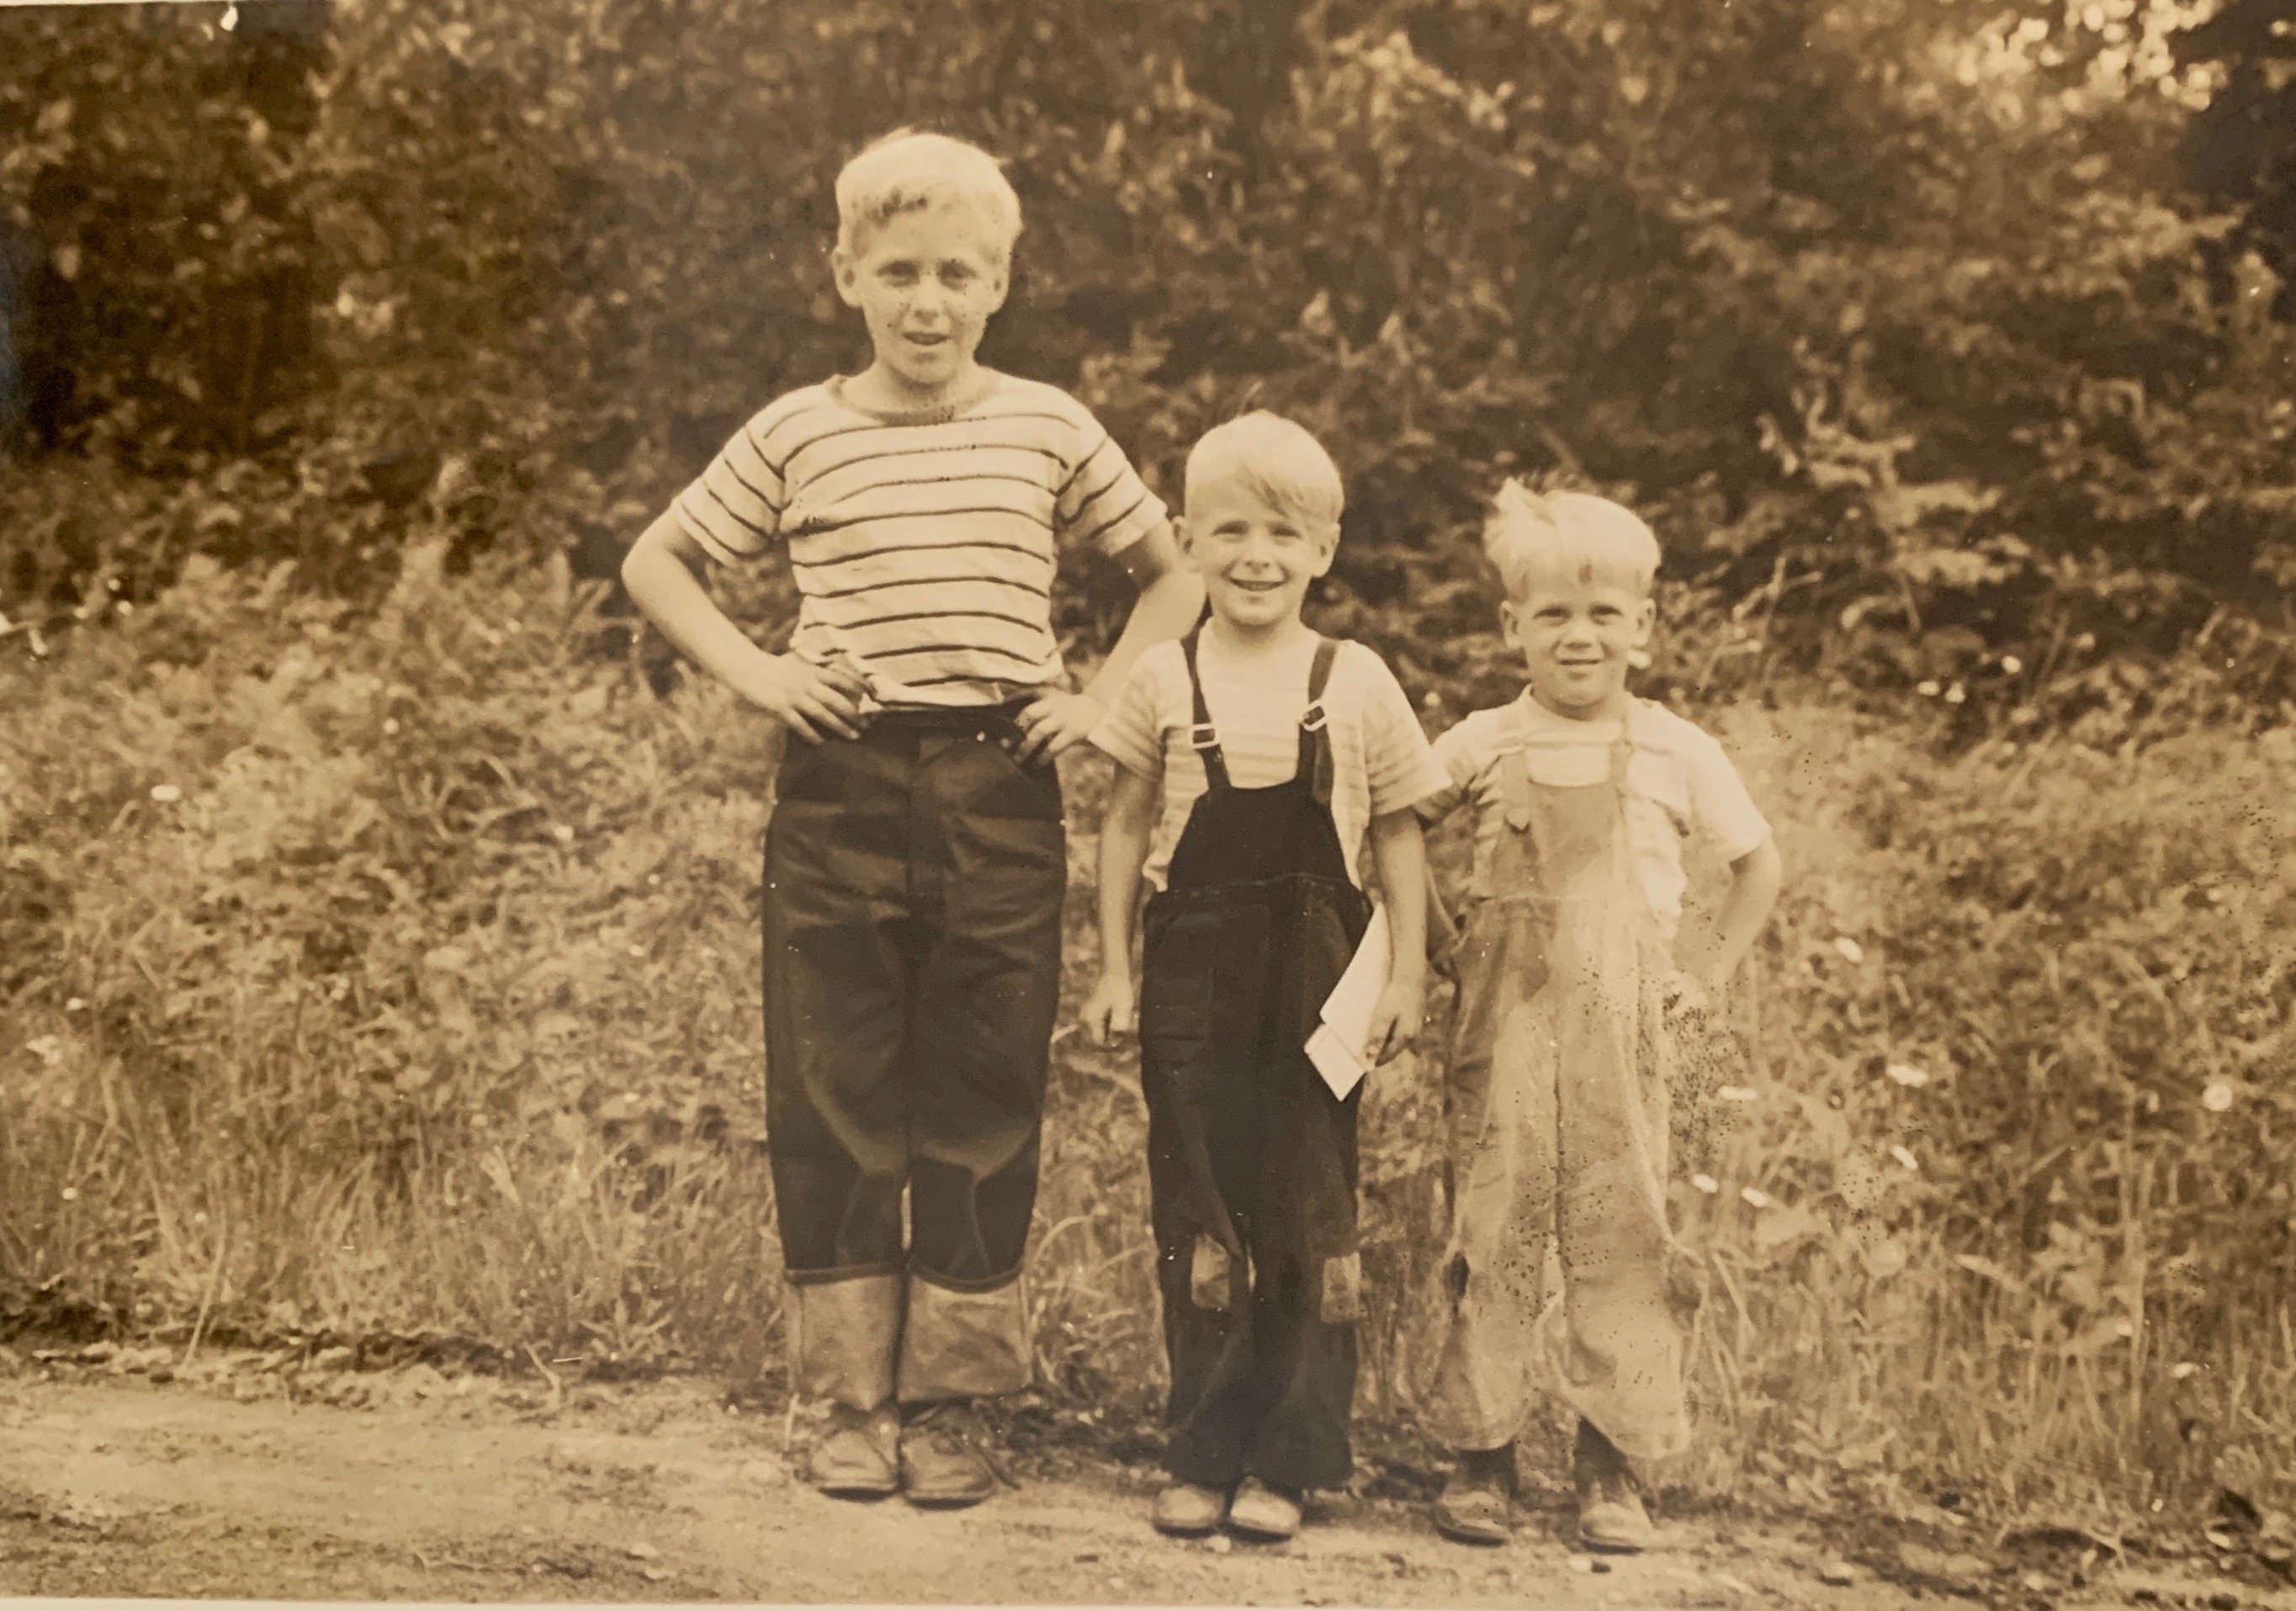 1939 my Dad on the right with his brothers